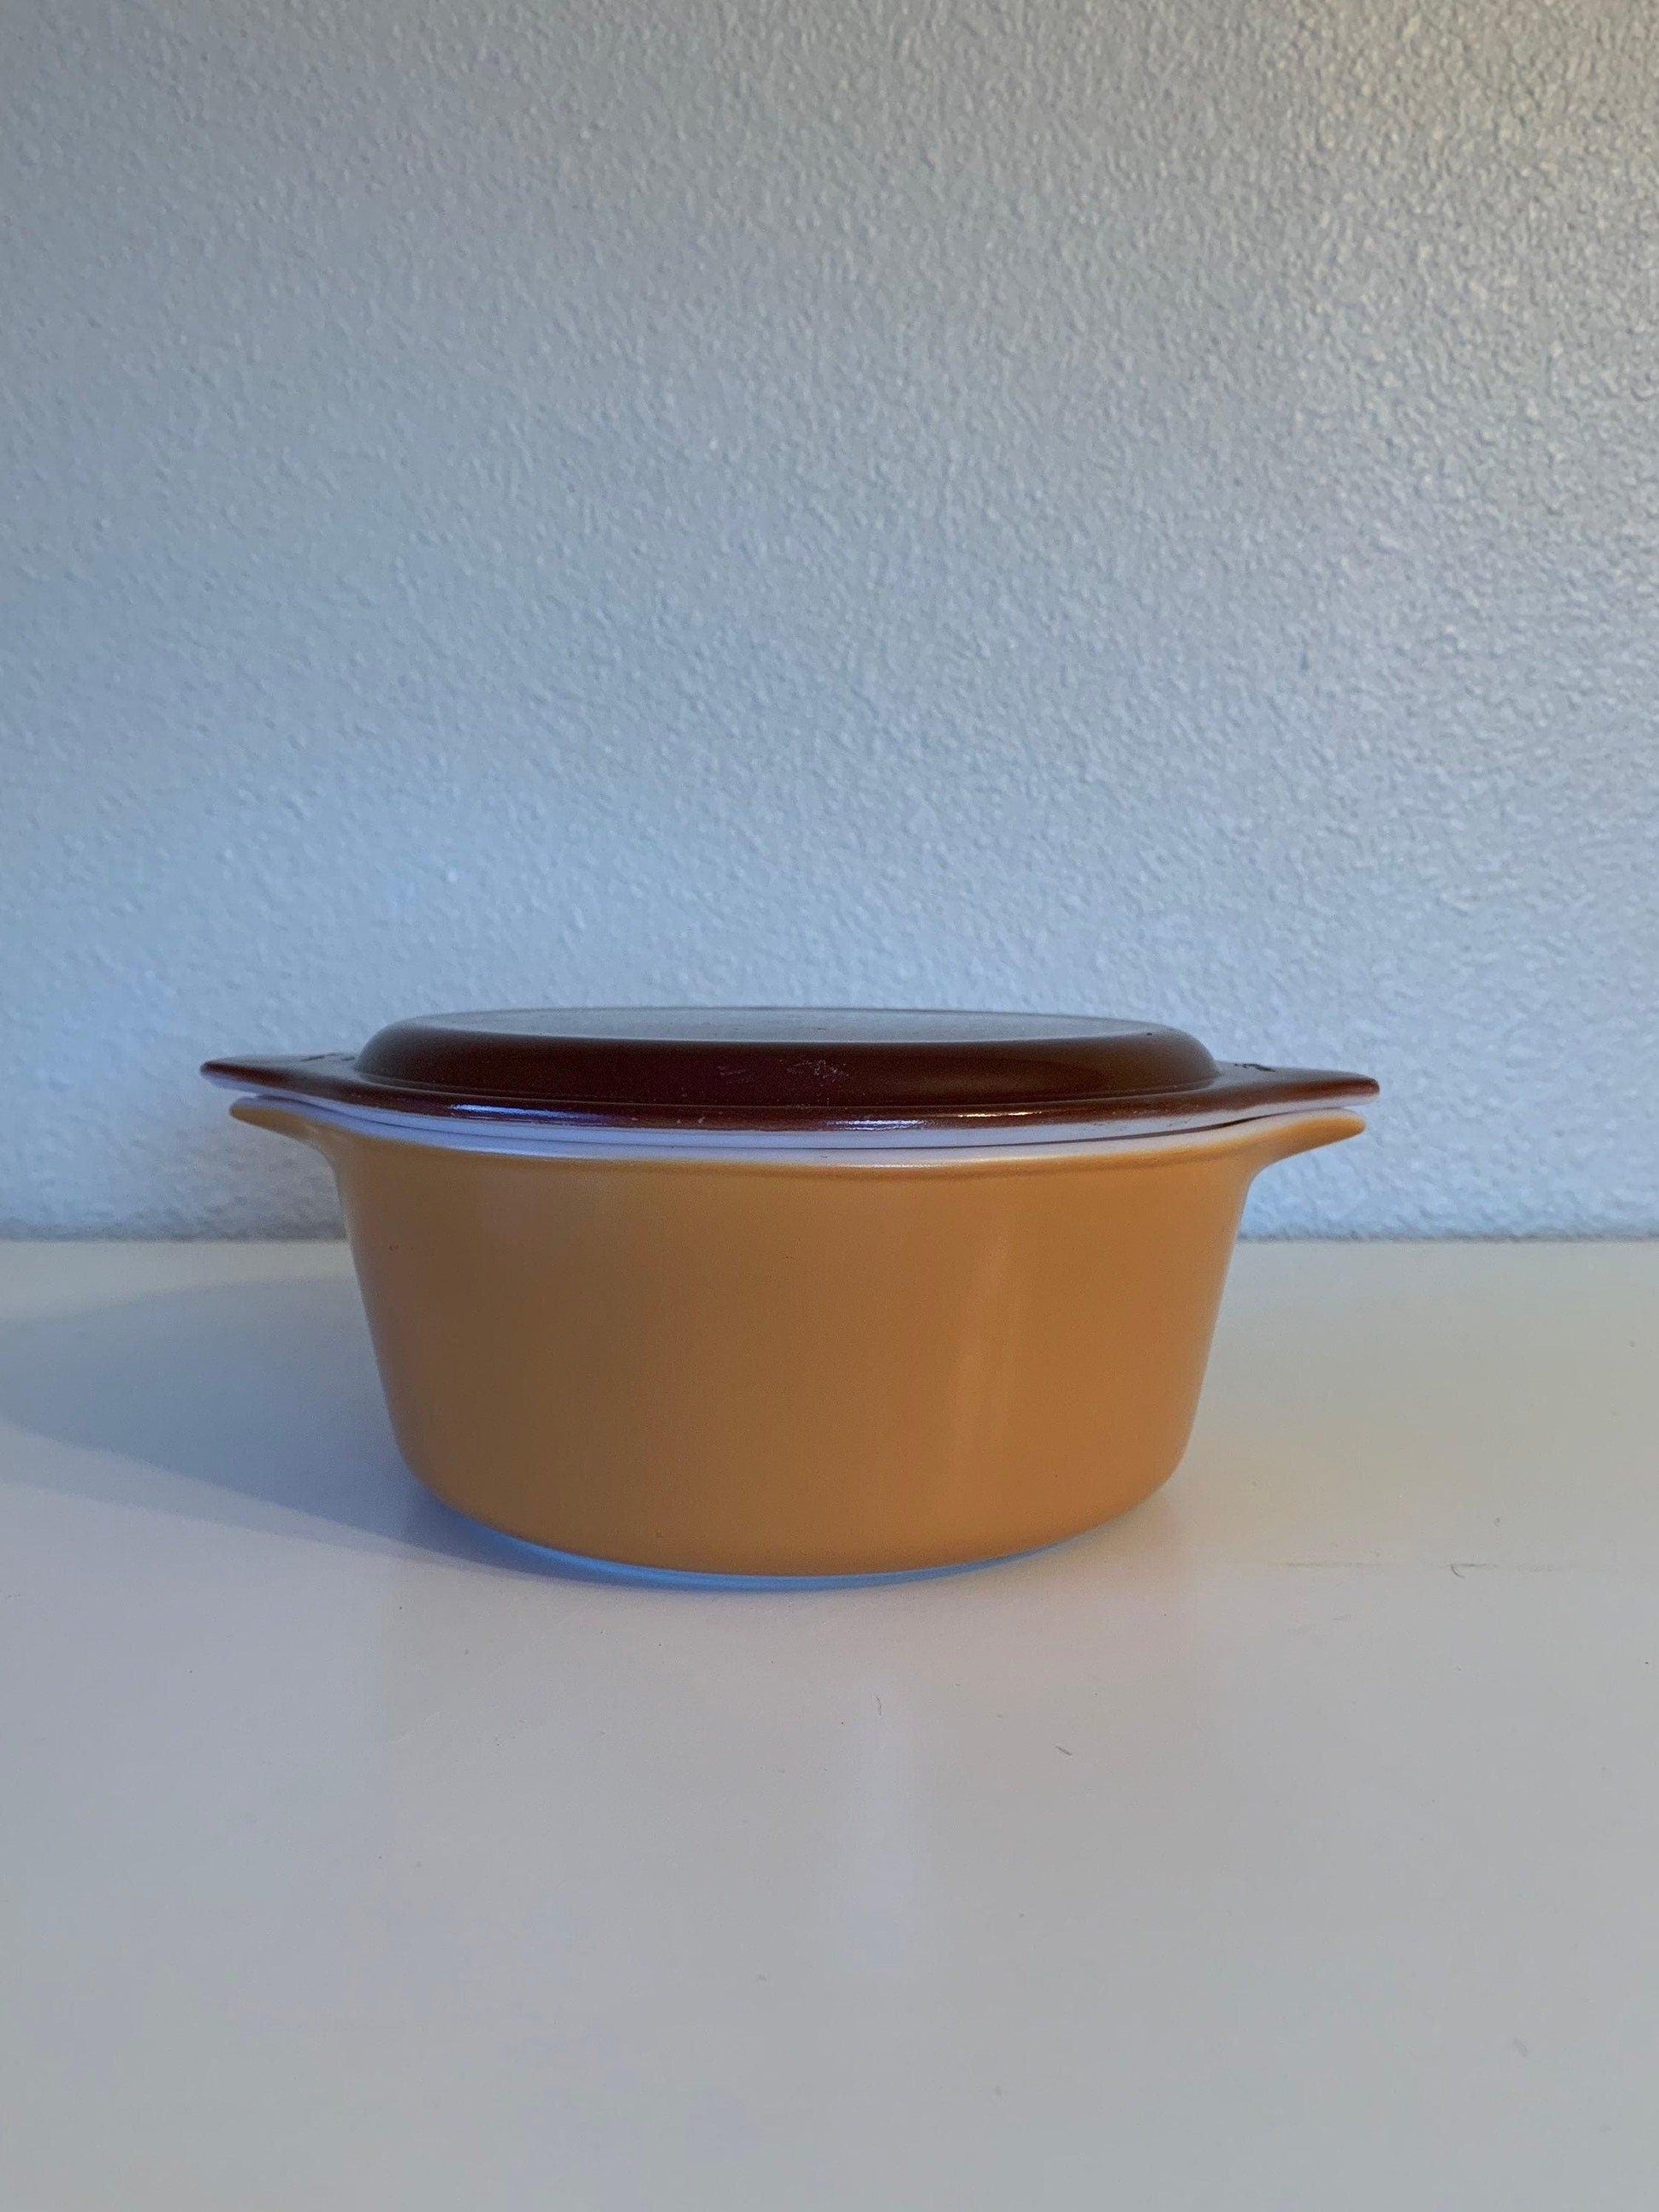 https://funkyhousevintage.com/cdn/shop/files/pyrex-472-1-12-pint-casserole-dish-old-orchard-pattern-solid-orange-with-solid-brown-lid-located-at-funkyhouse-vintage-antique-store-weiser-idaho-9_da4c4ecd-8fdc-4803-ba6e-ff7af83f0d9d.jpg?v=1688592787&width=1946